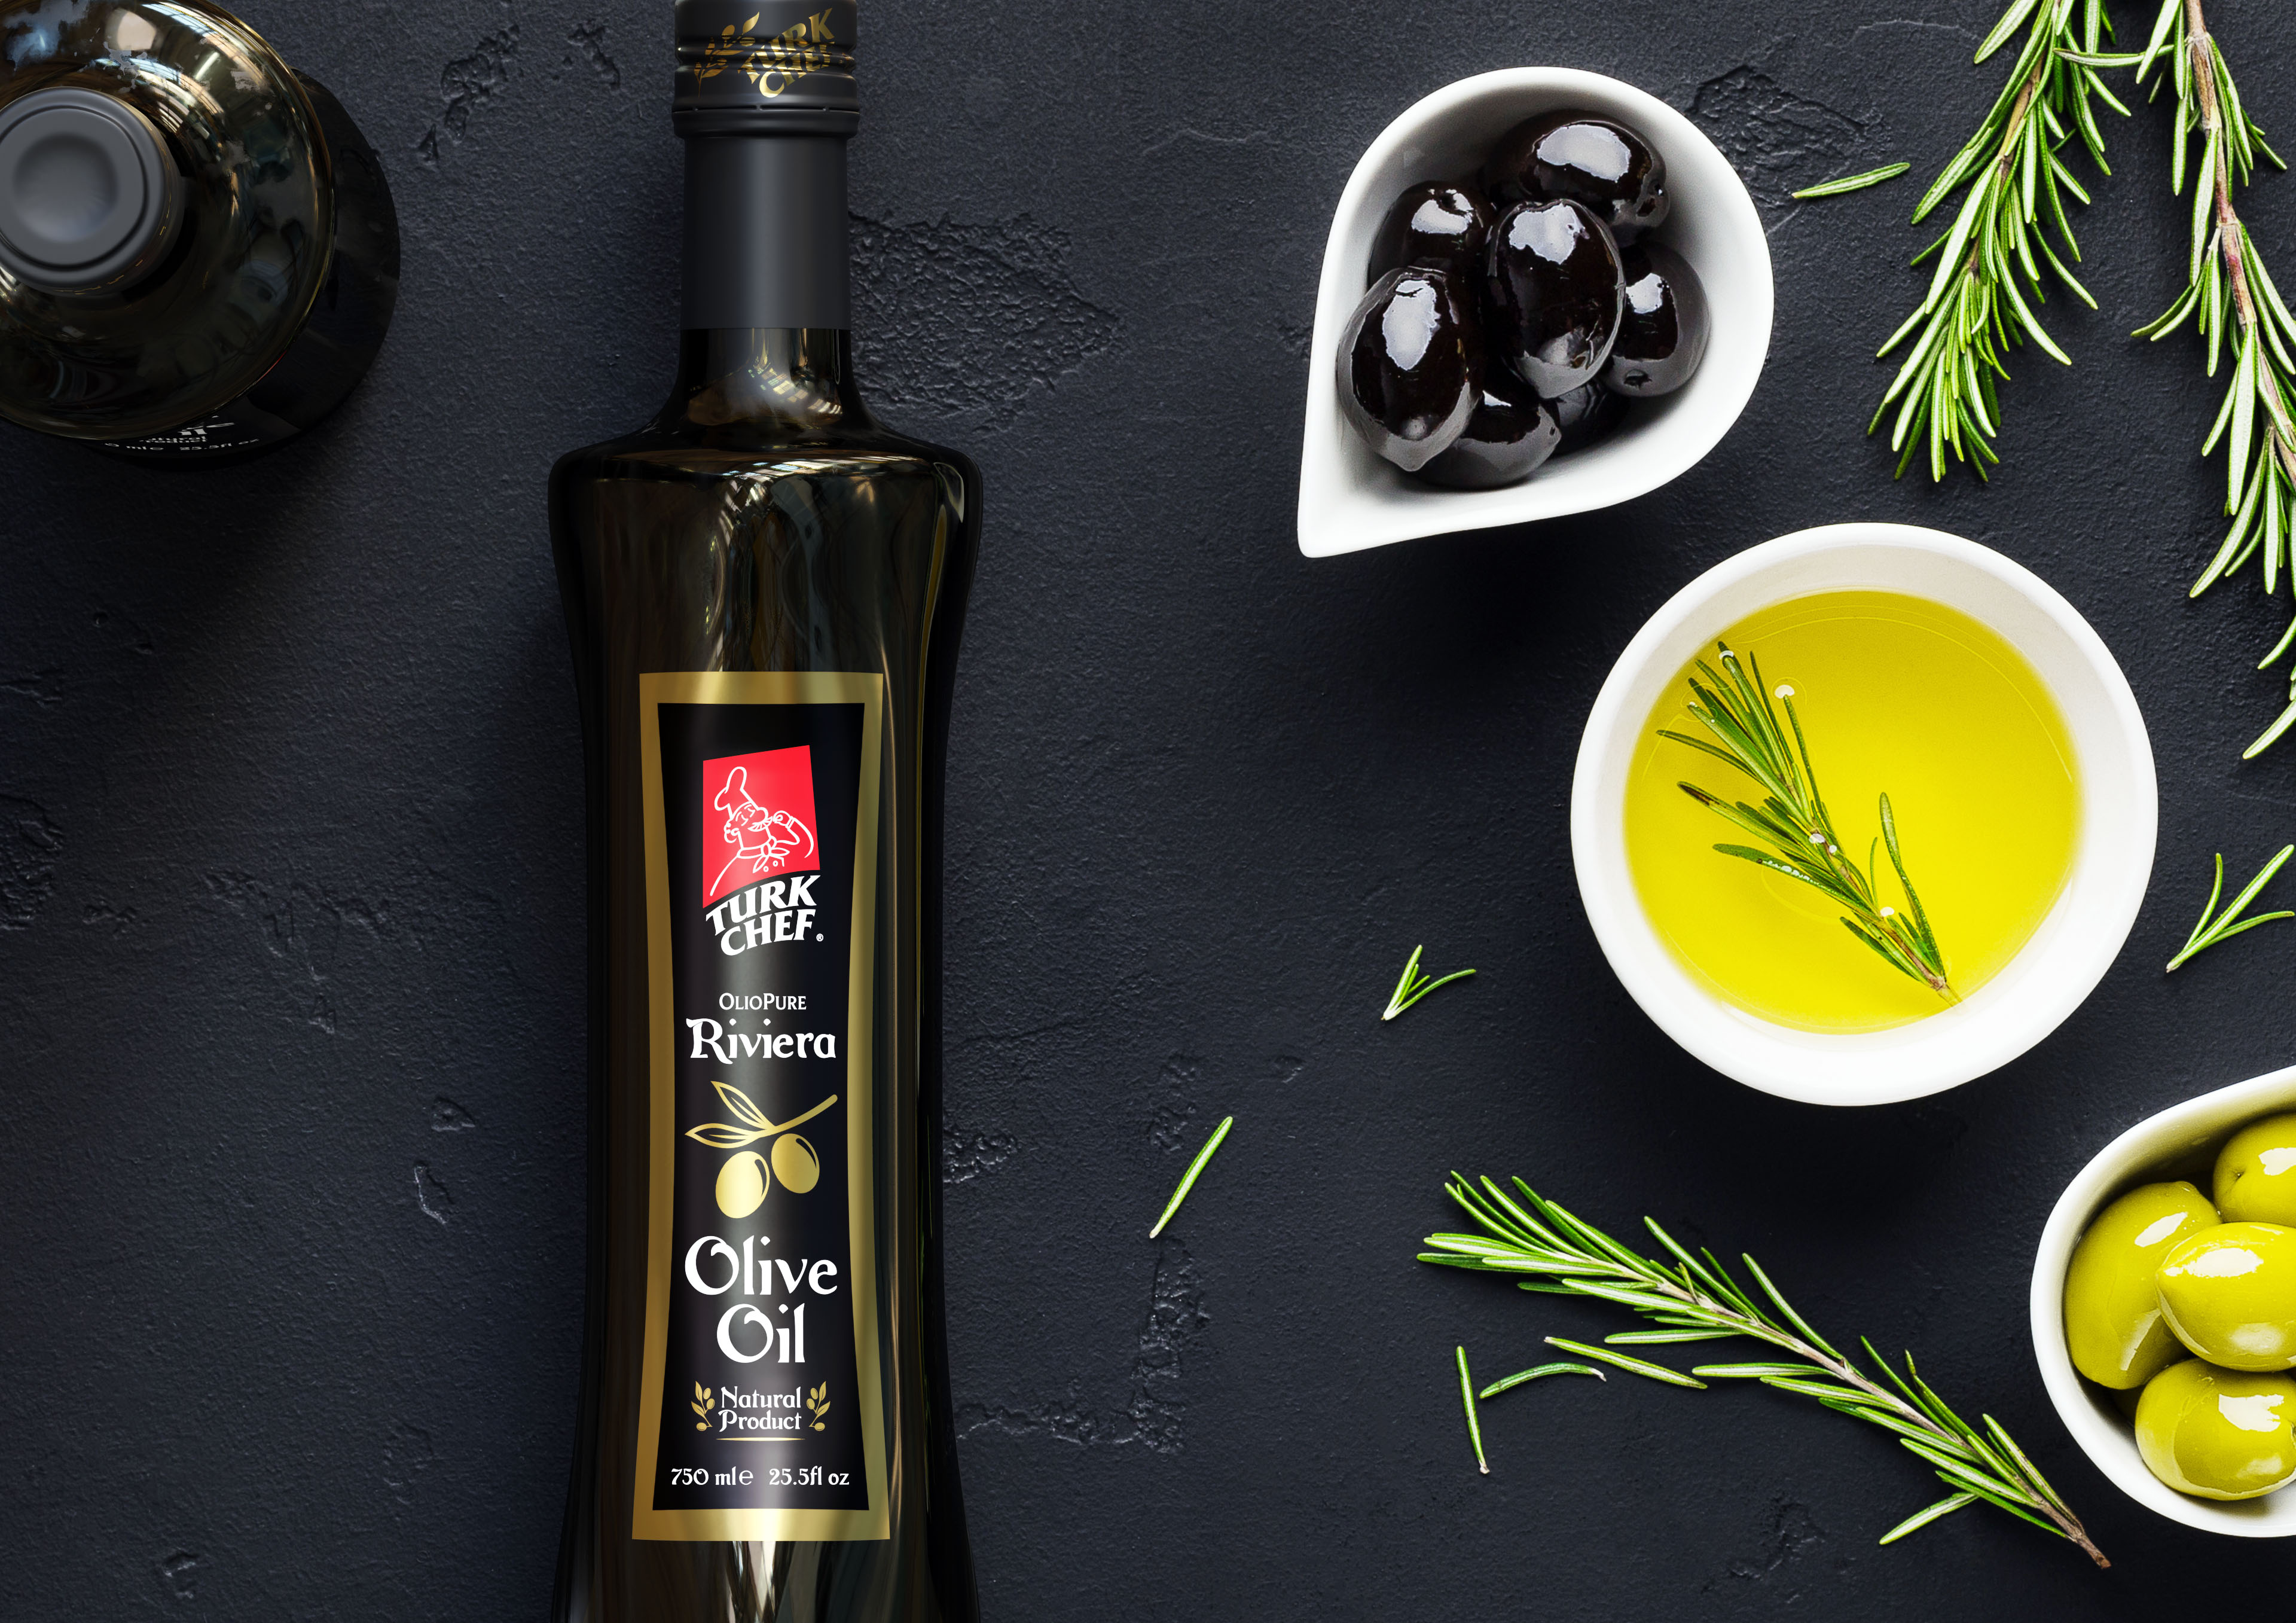 A bottle of olive oil. Оливковое масло. Оливки и оливковое масло. Бутылка оливкового масла. Олив Ойл масло оливковое.